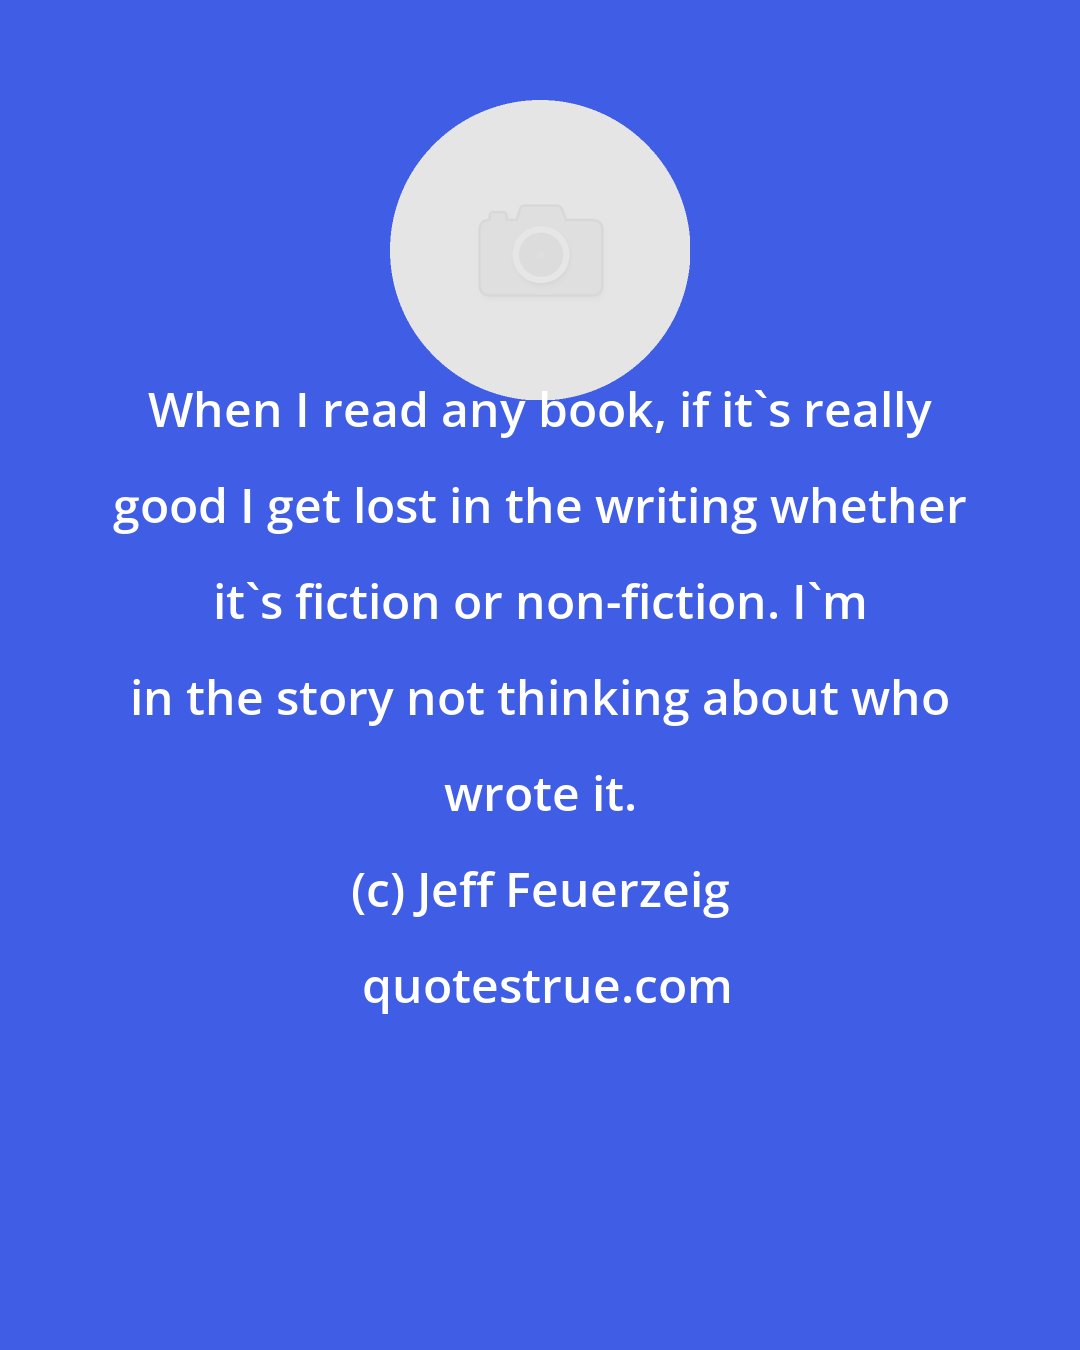 Jeff Feuerzeig: When I read any book, if it's really good I get lost in the writing whether it's fiction or non-fiction. I'm in the story not thinking about who wrote it.